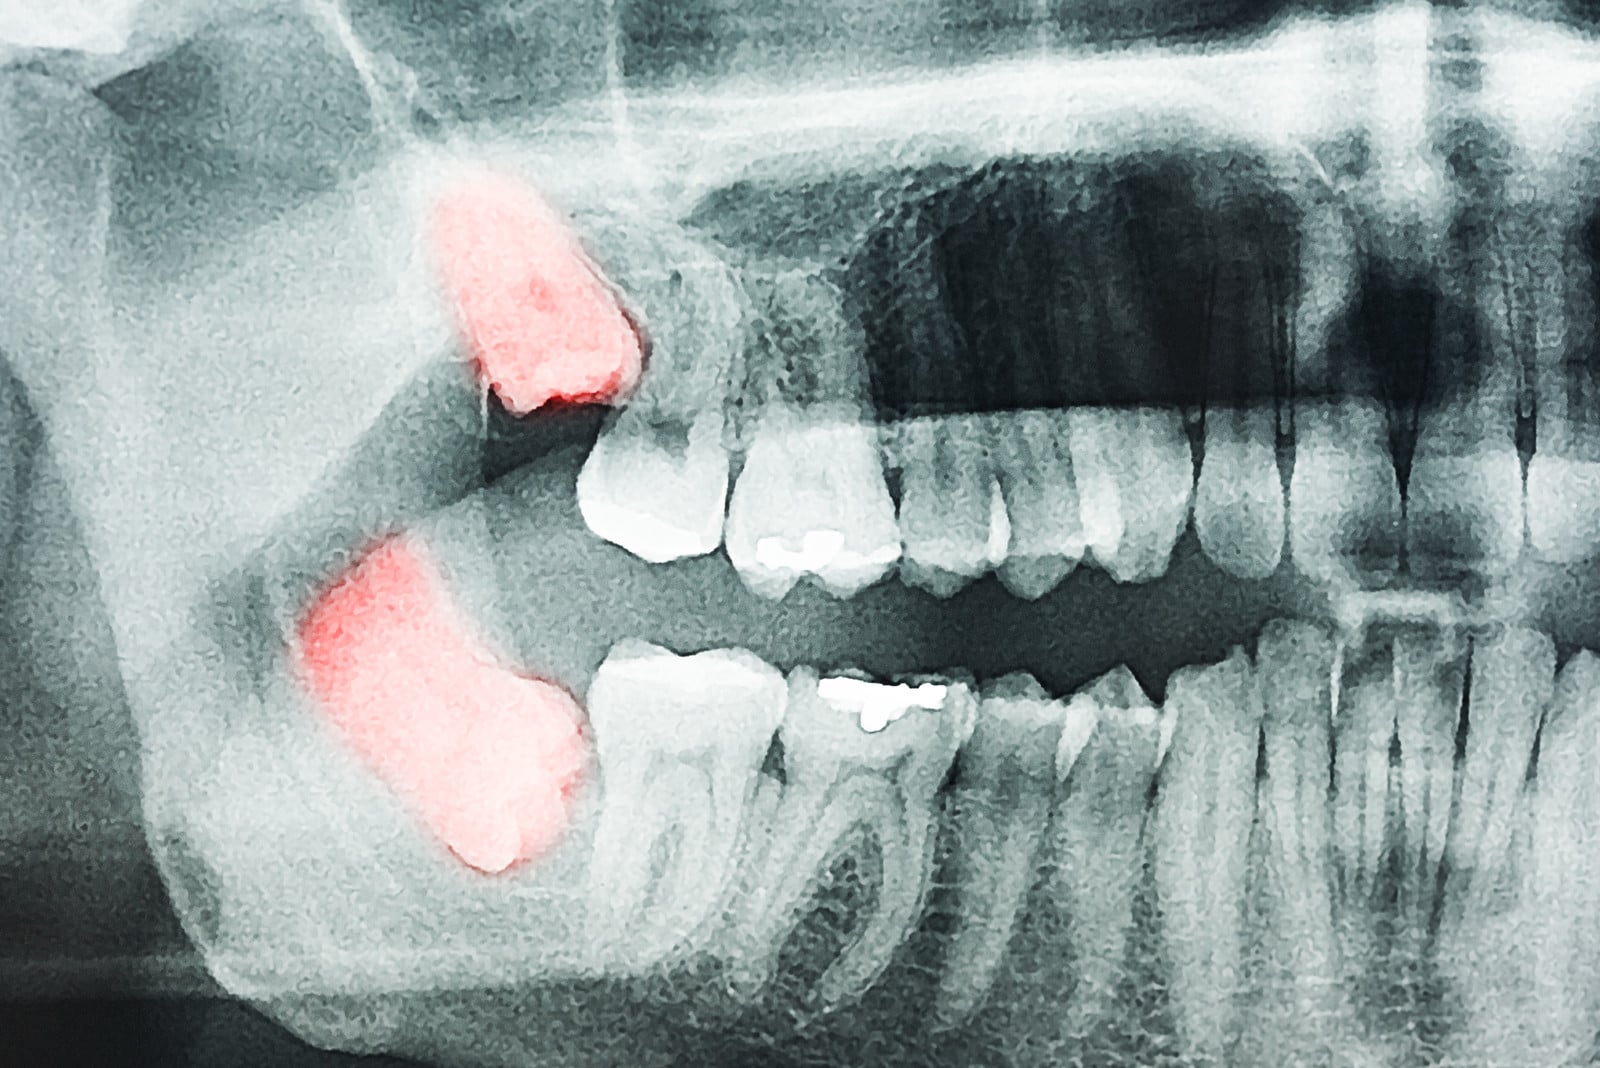 trismus after wisdom tooth extraction is a common symptom